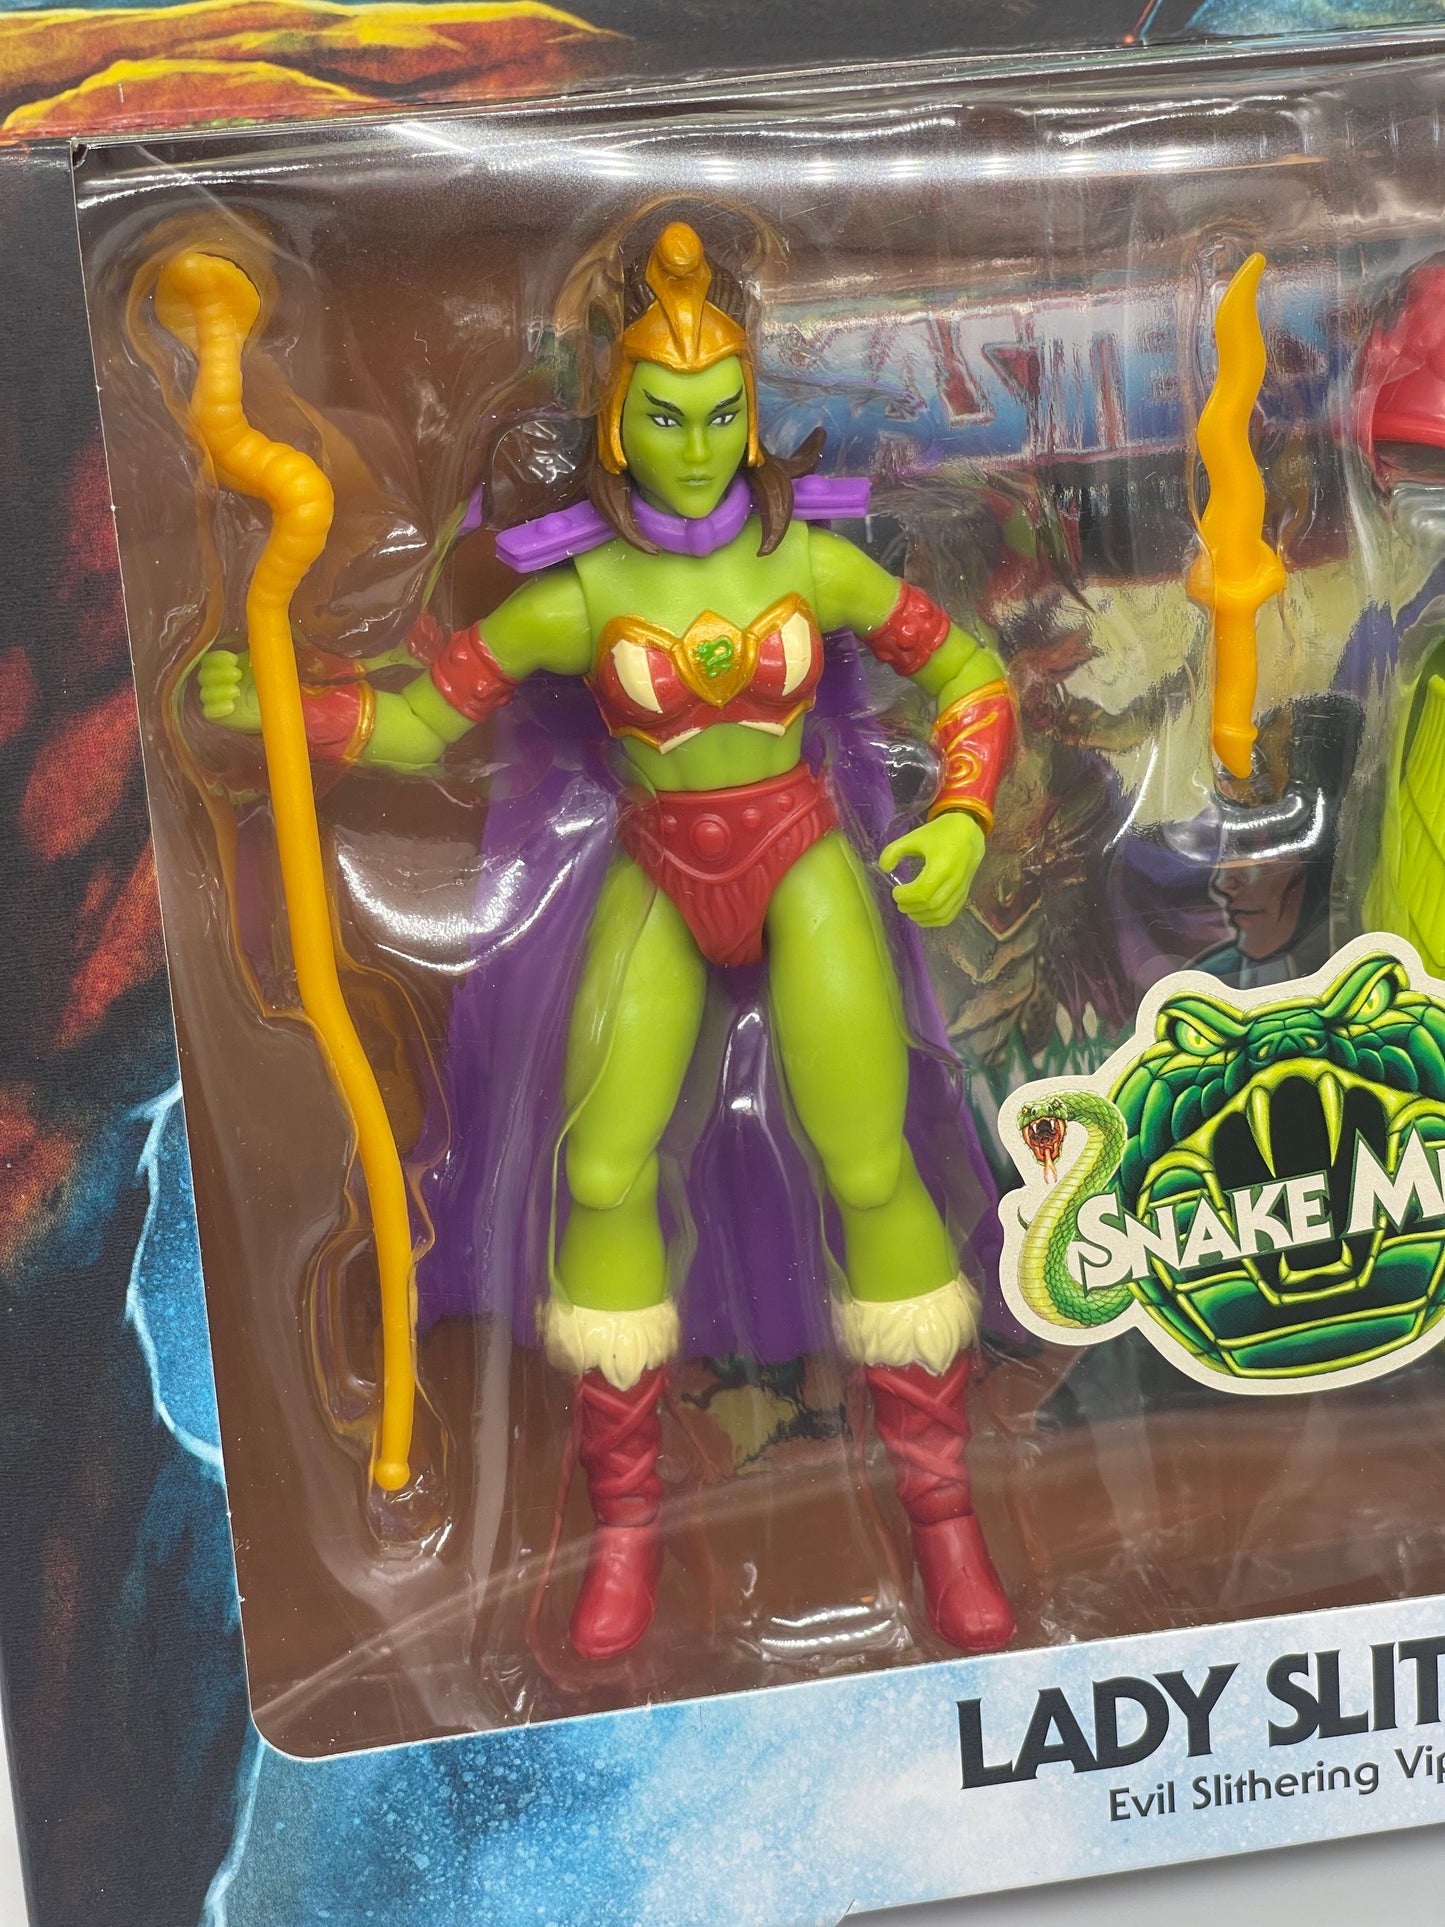 Masters of the Universe "Lady Slither" Origins Mattel Creations Exclusive (2023)